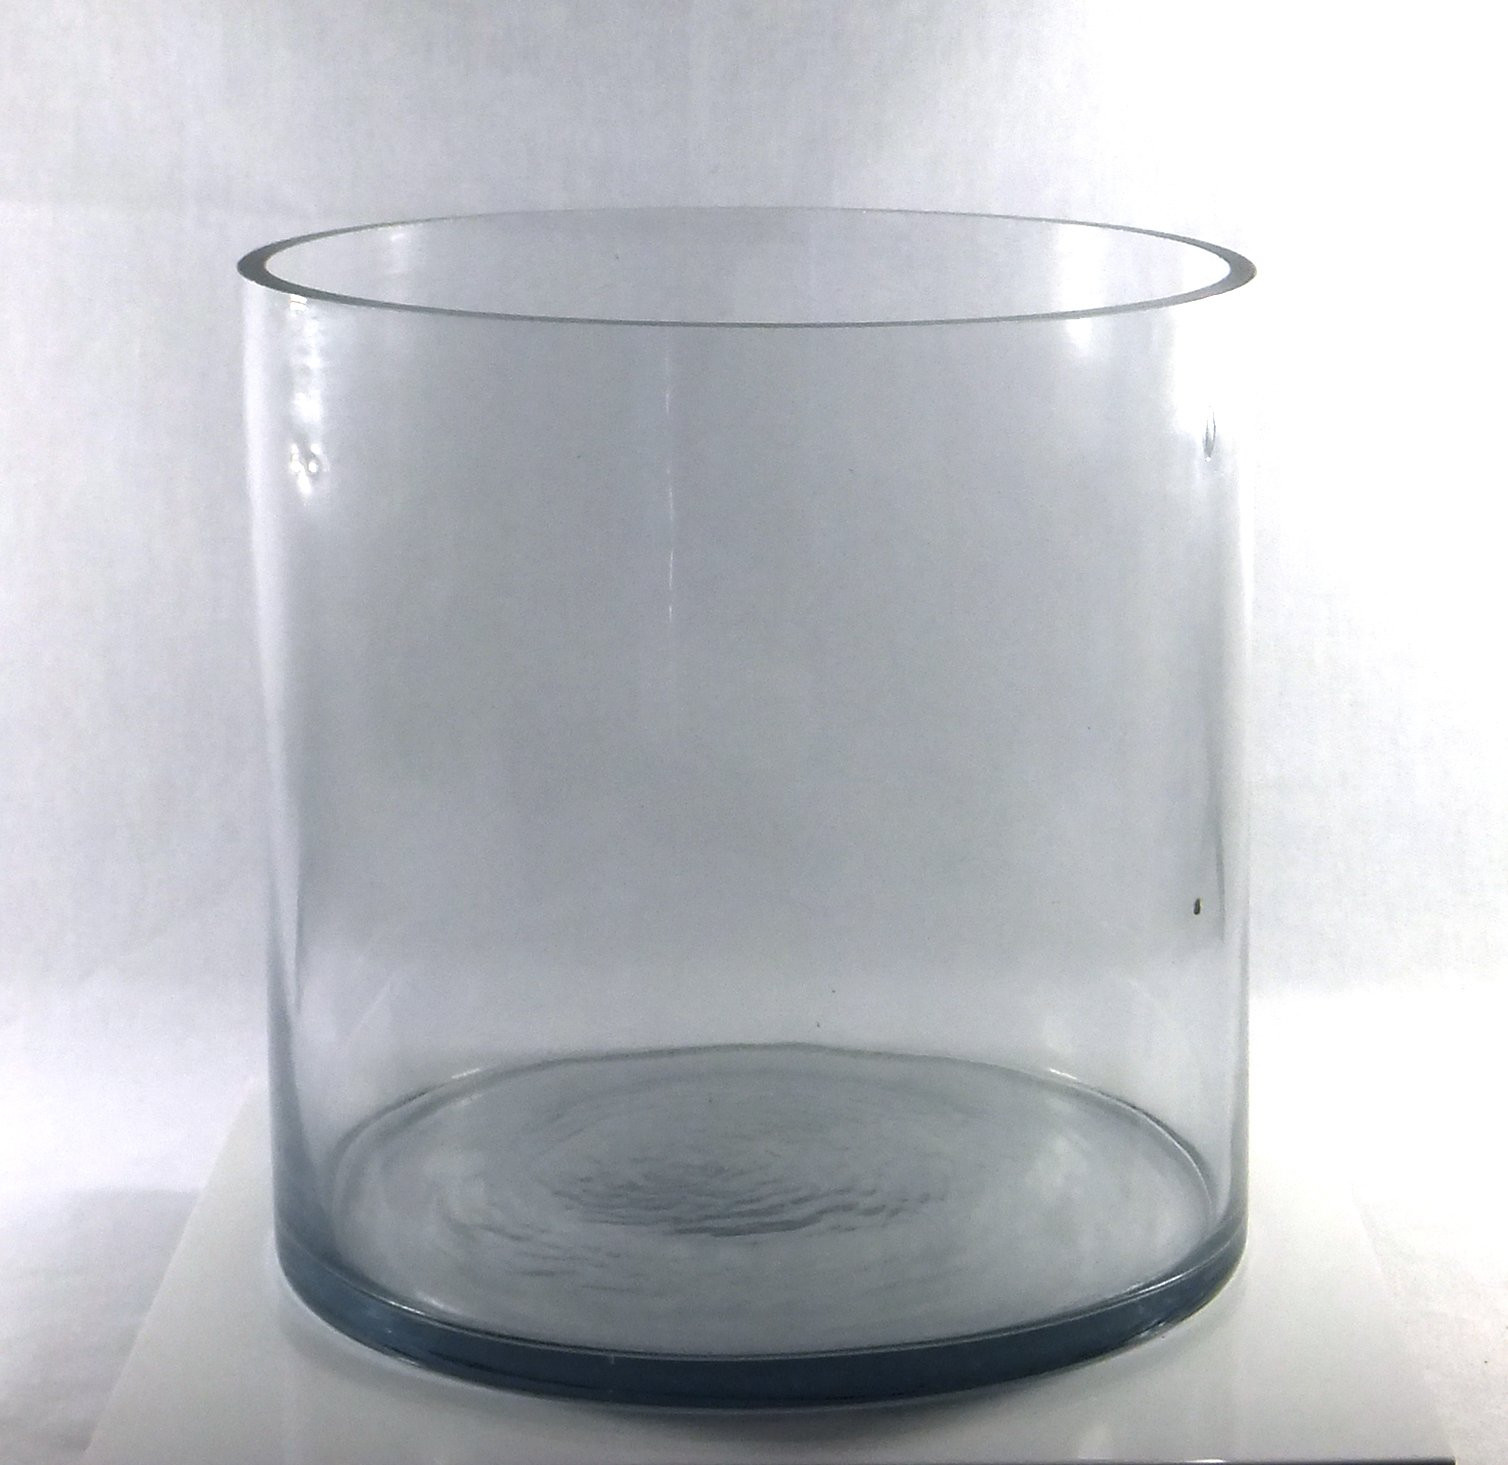 25 Great 36 Inch Cylinder Vase 2024 free download 36 inch cylinder vase of buy 8 inch round large glass vase 8 clear cylinder oversize pertaining to 8 inch round large glass vase 8 clear cylinder oversize centerpiece 8x8